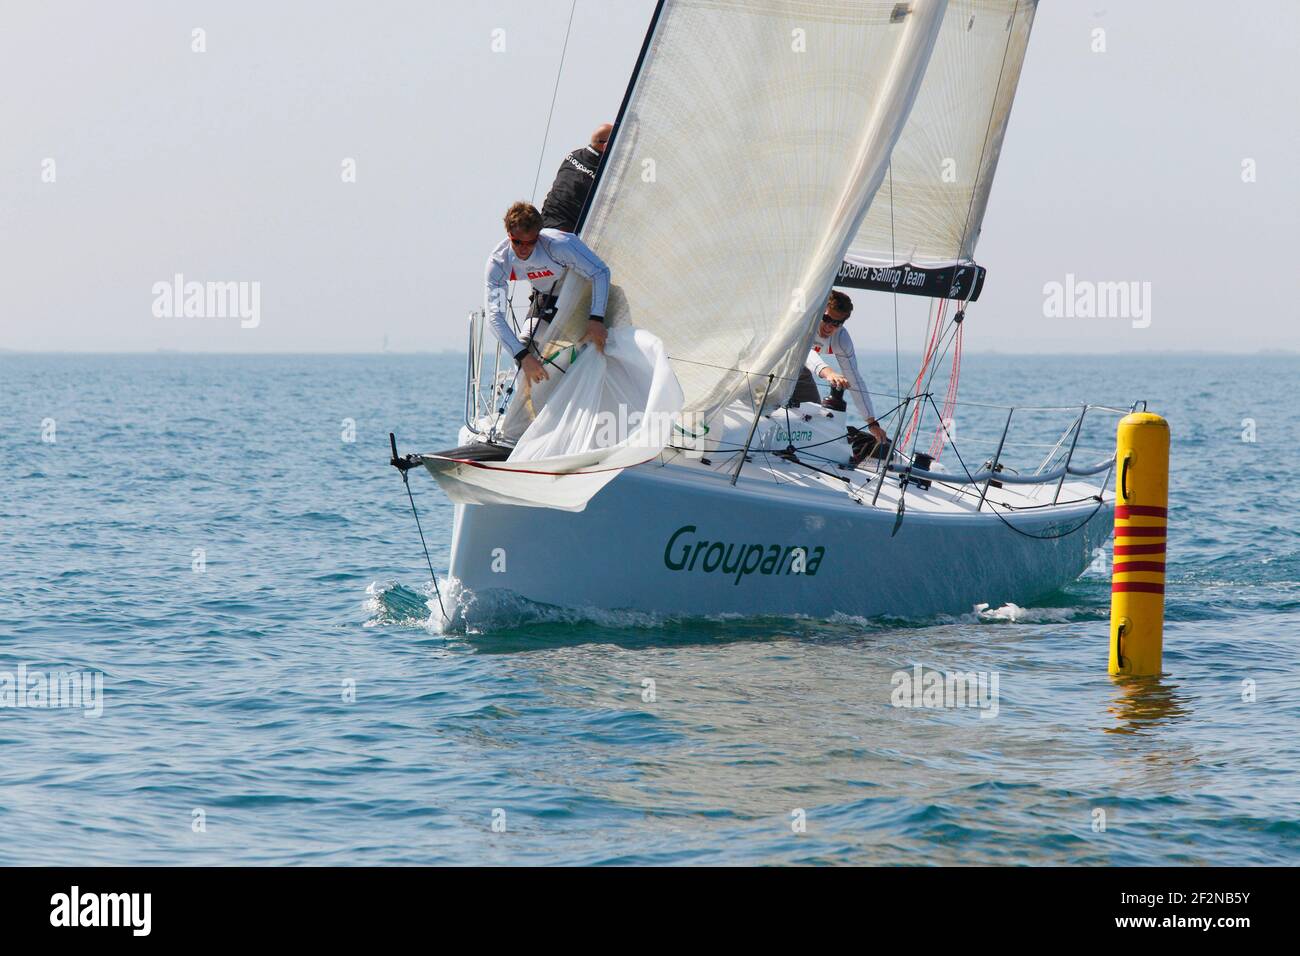 SAILING - SPI OUEST 2011 - LA TRINITE SUR MER (FRA) - 20/04/2011 - PHOTO : CHRISTOPHE LAUNAY / DPPI Training session for the M34 before the Spi Ouest - GROUPAMA Stock Photo